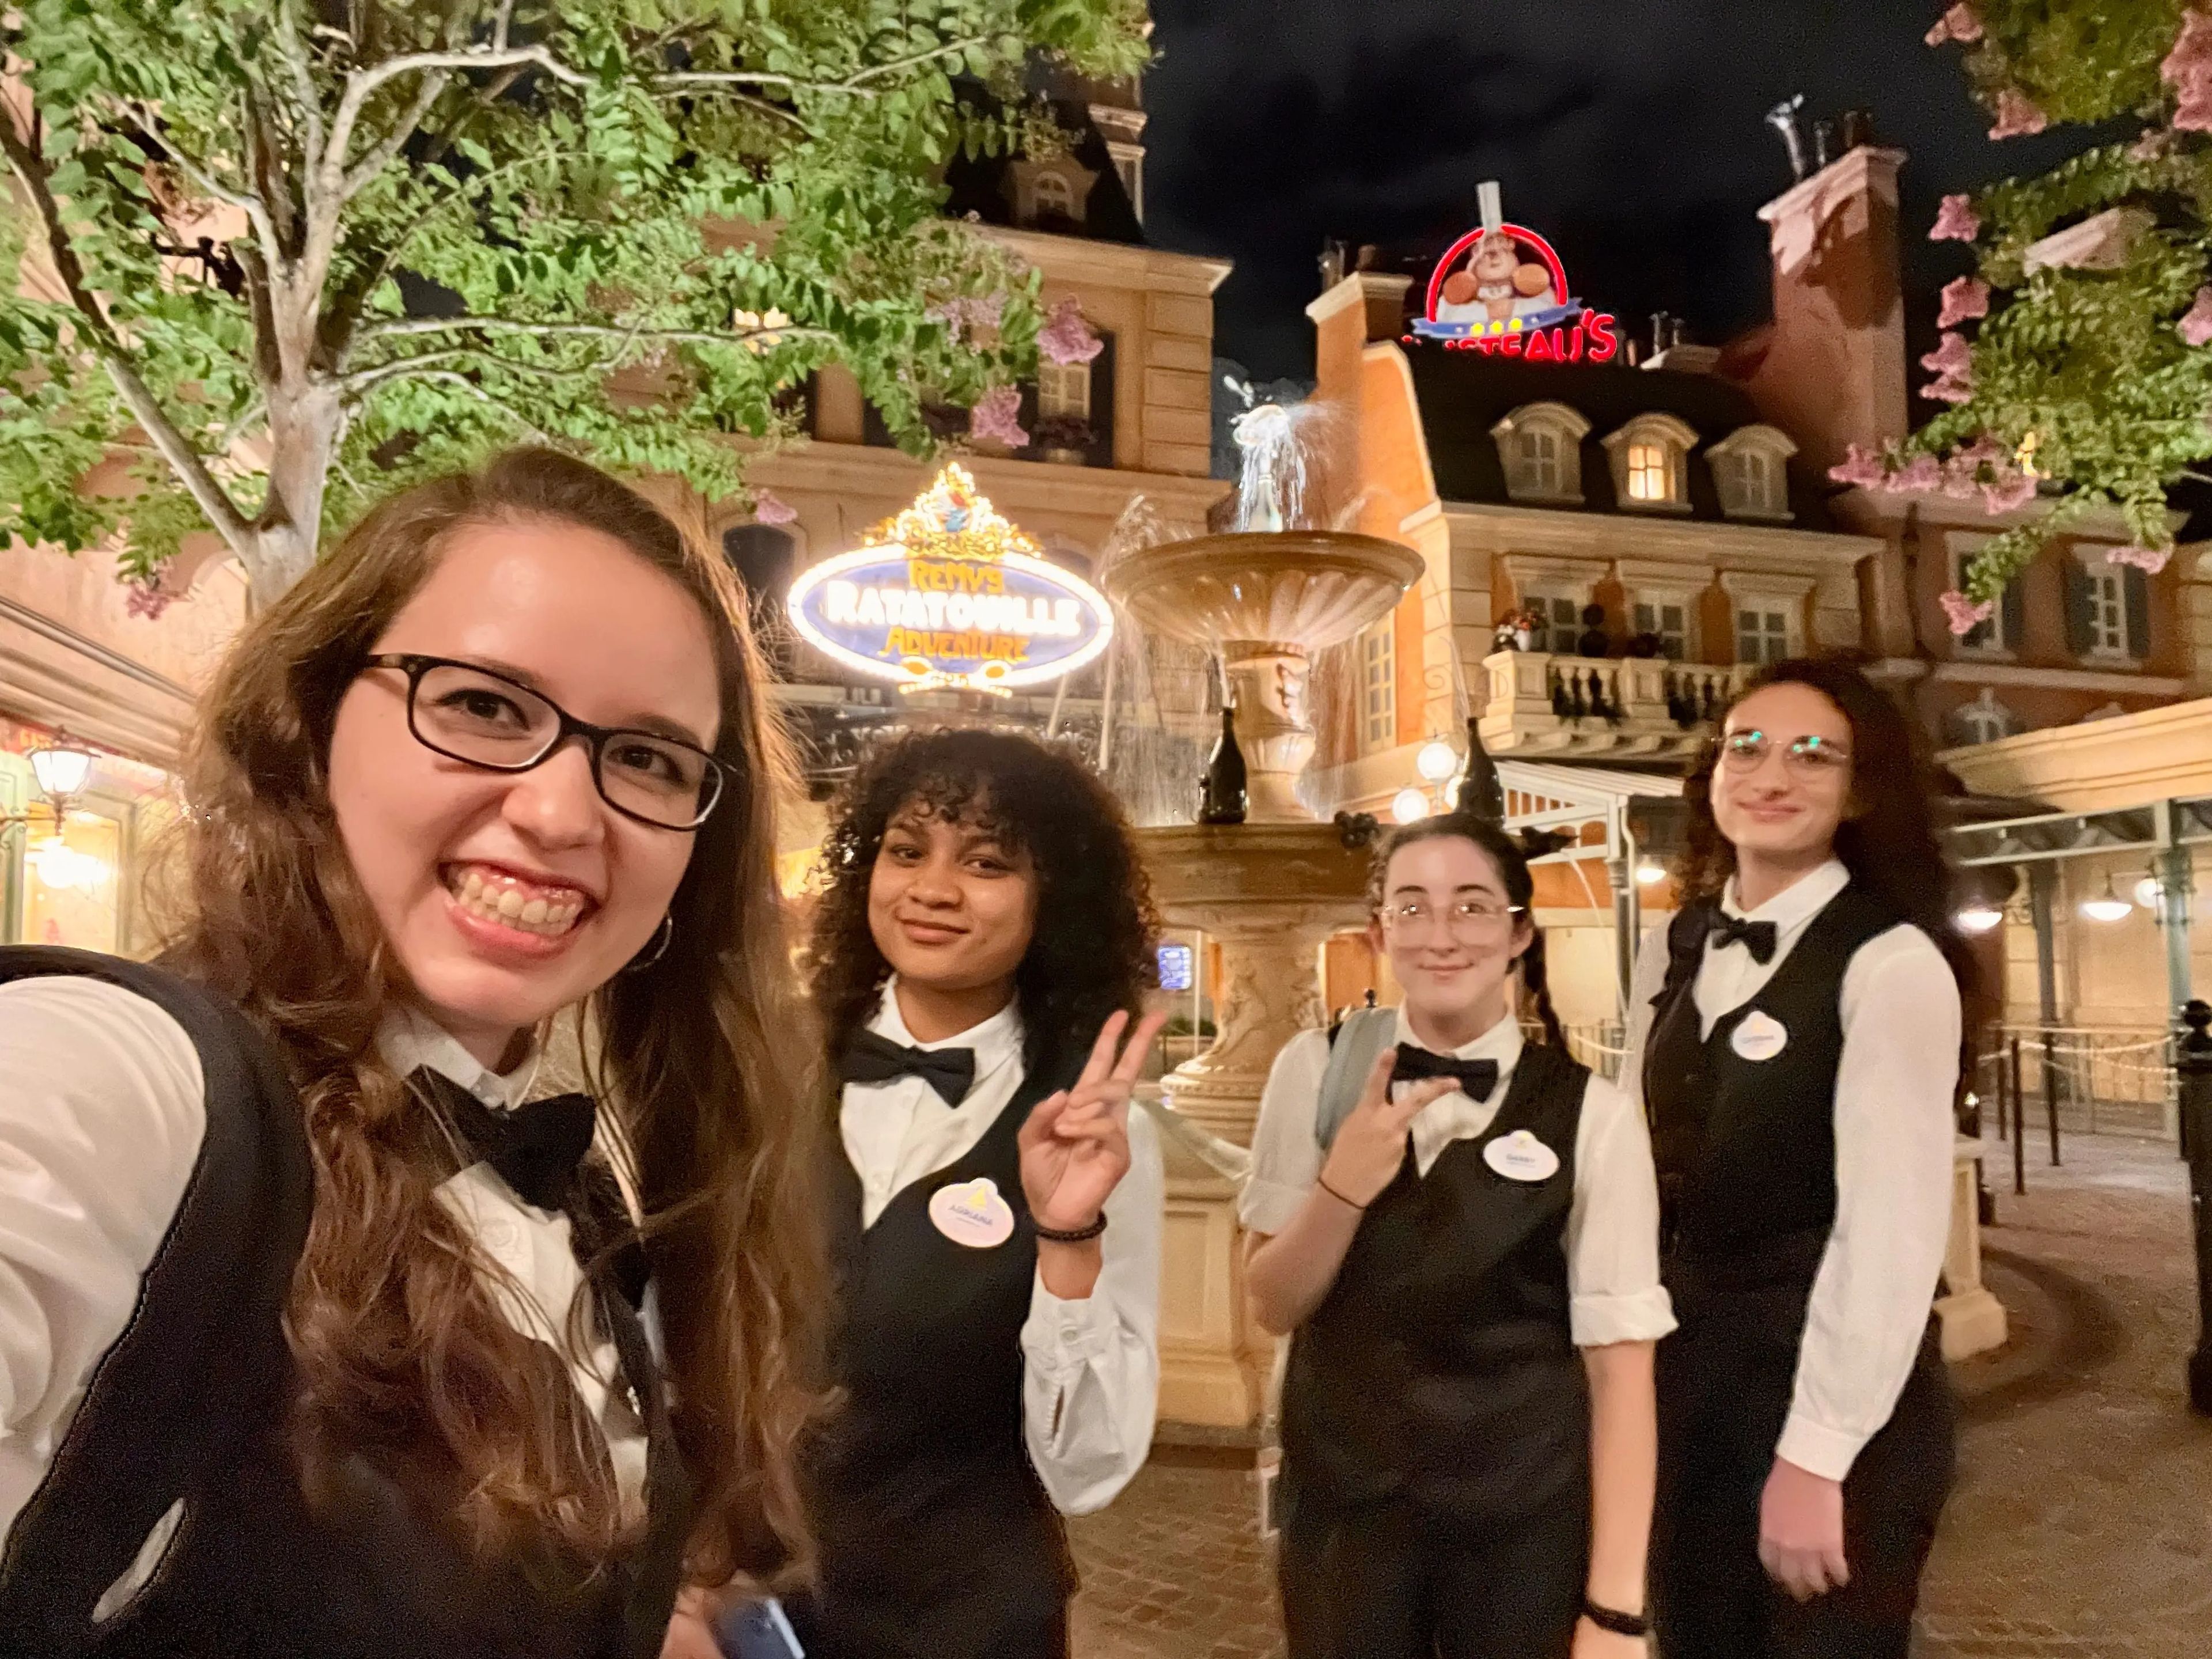 sofia and three other cast members posing for a photo in the france pavilion at epcot in disney world